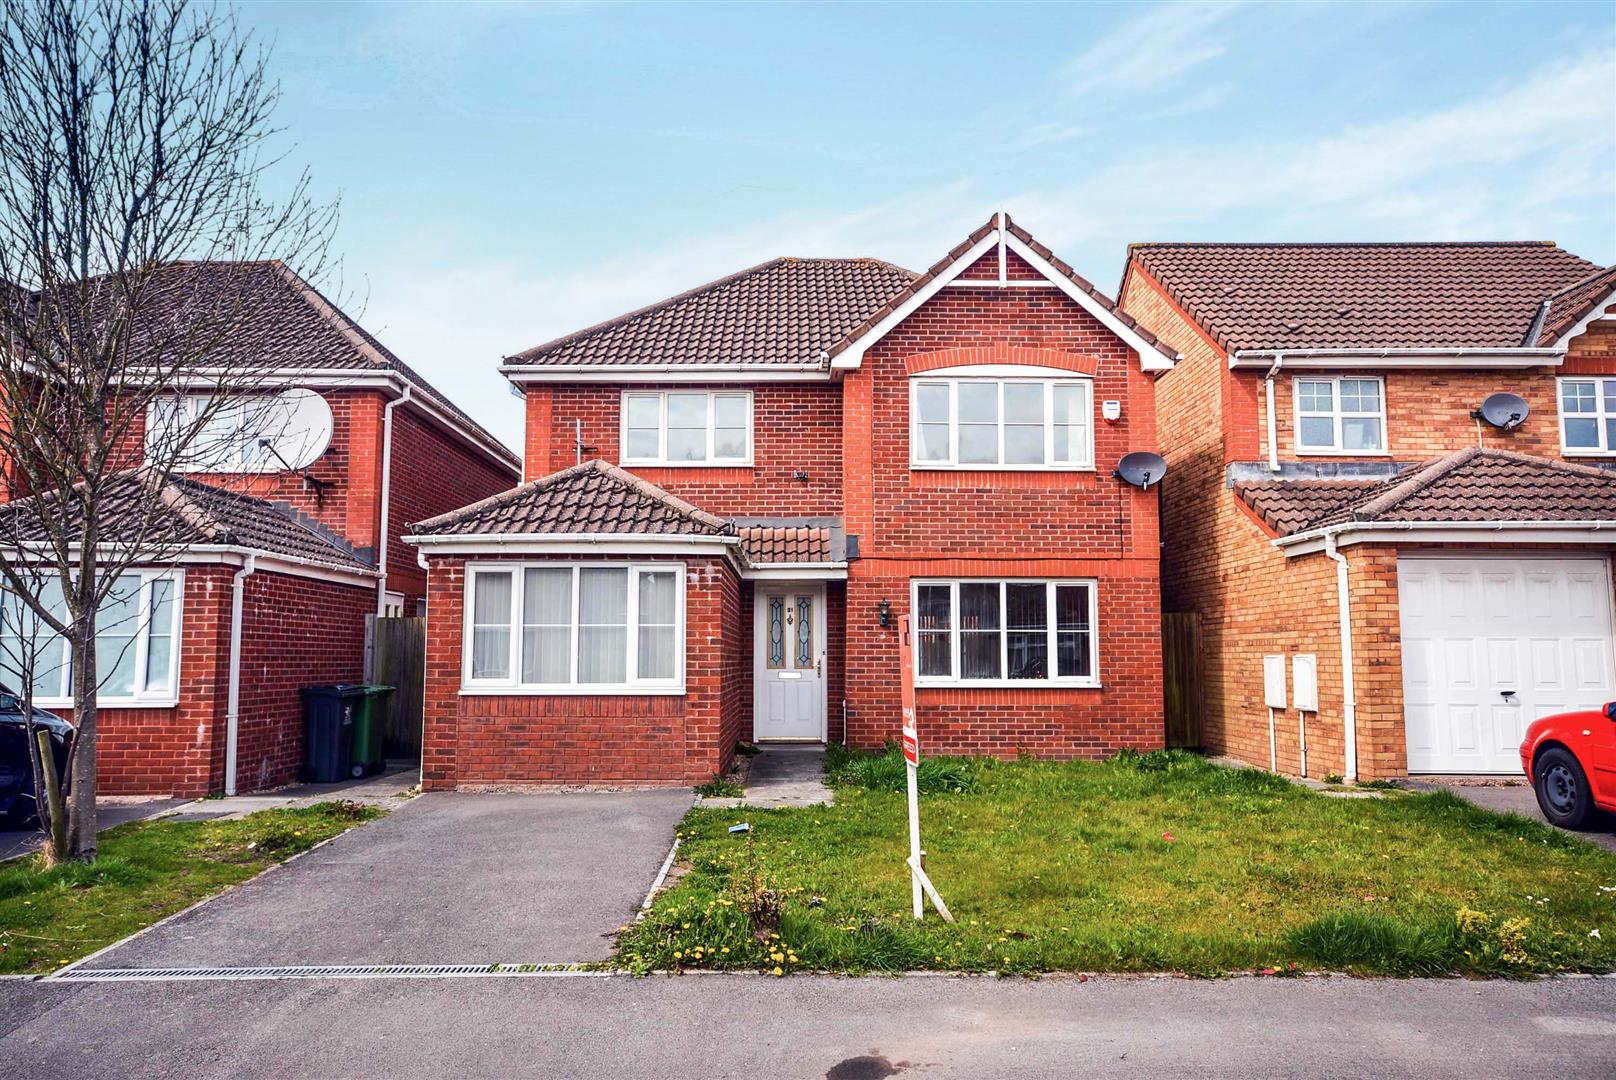 4 bed detached house for sale in Glan Rhymni, Cardiff - Property Image 1